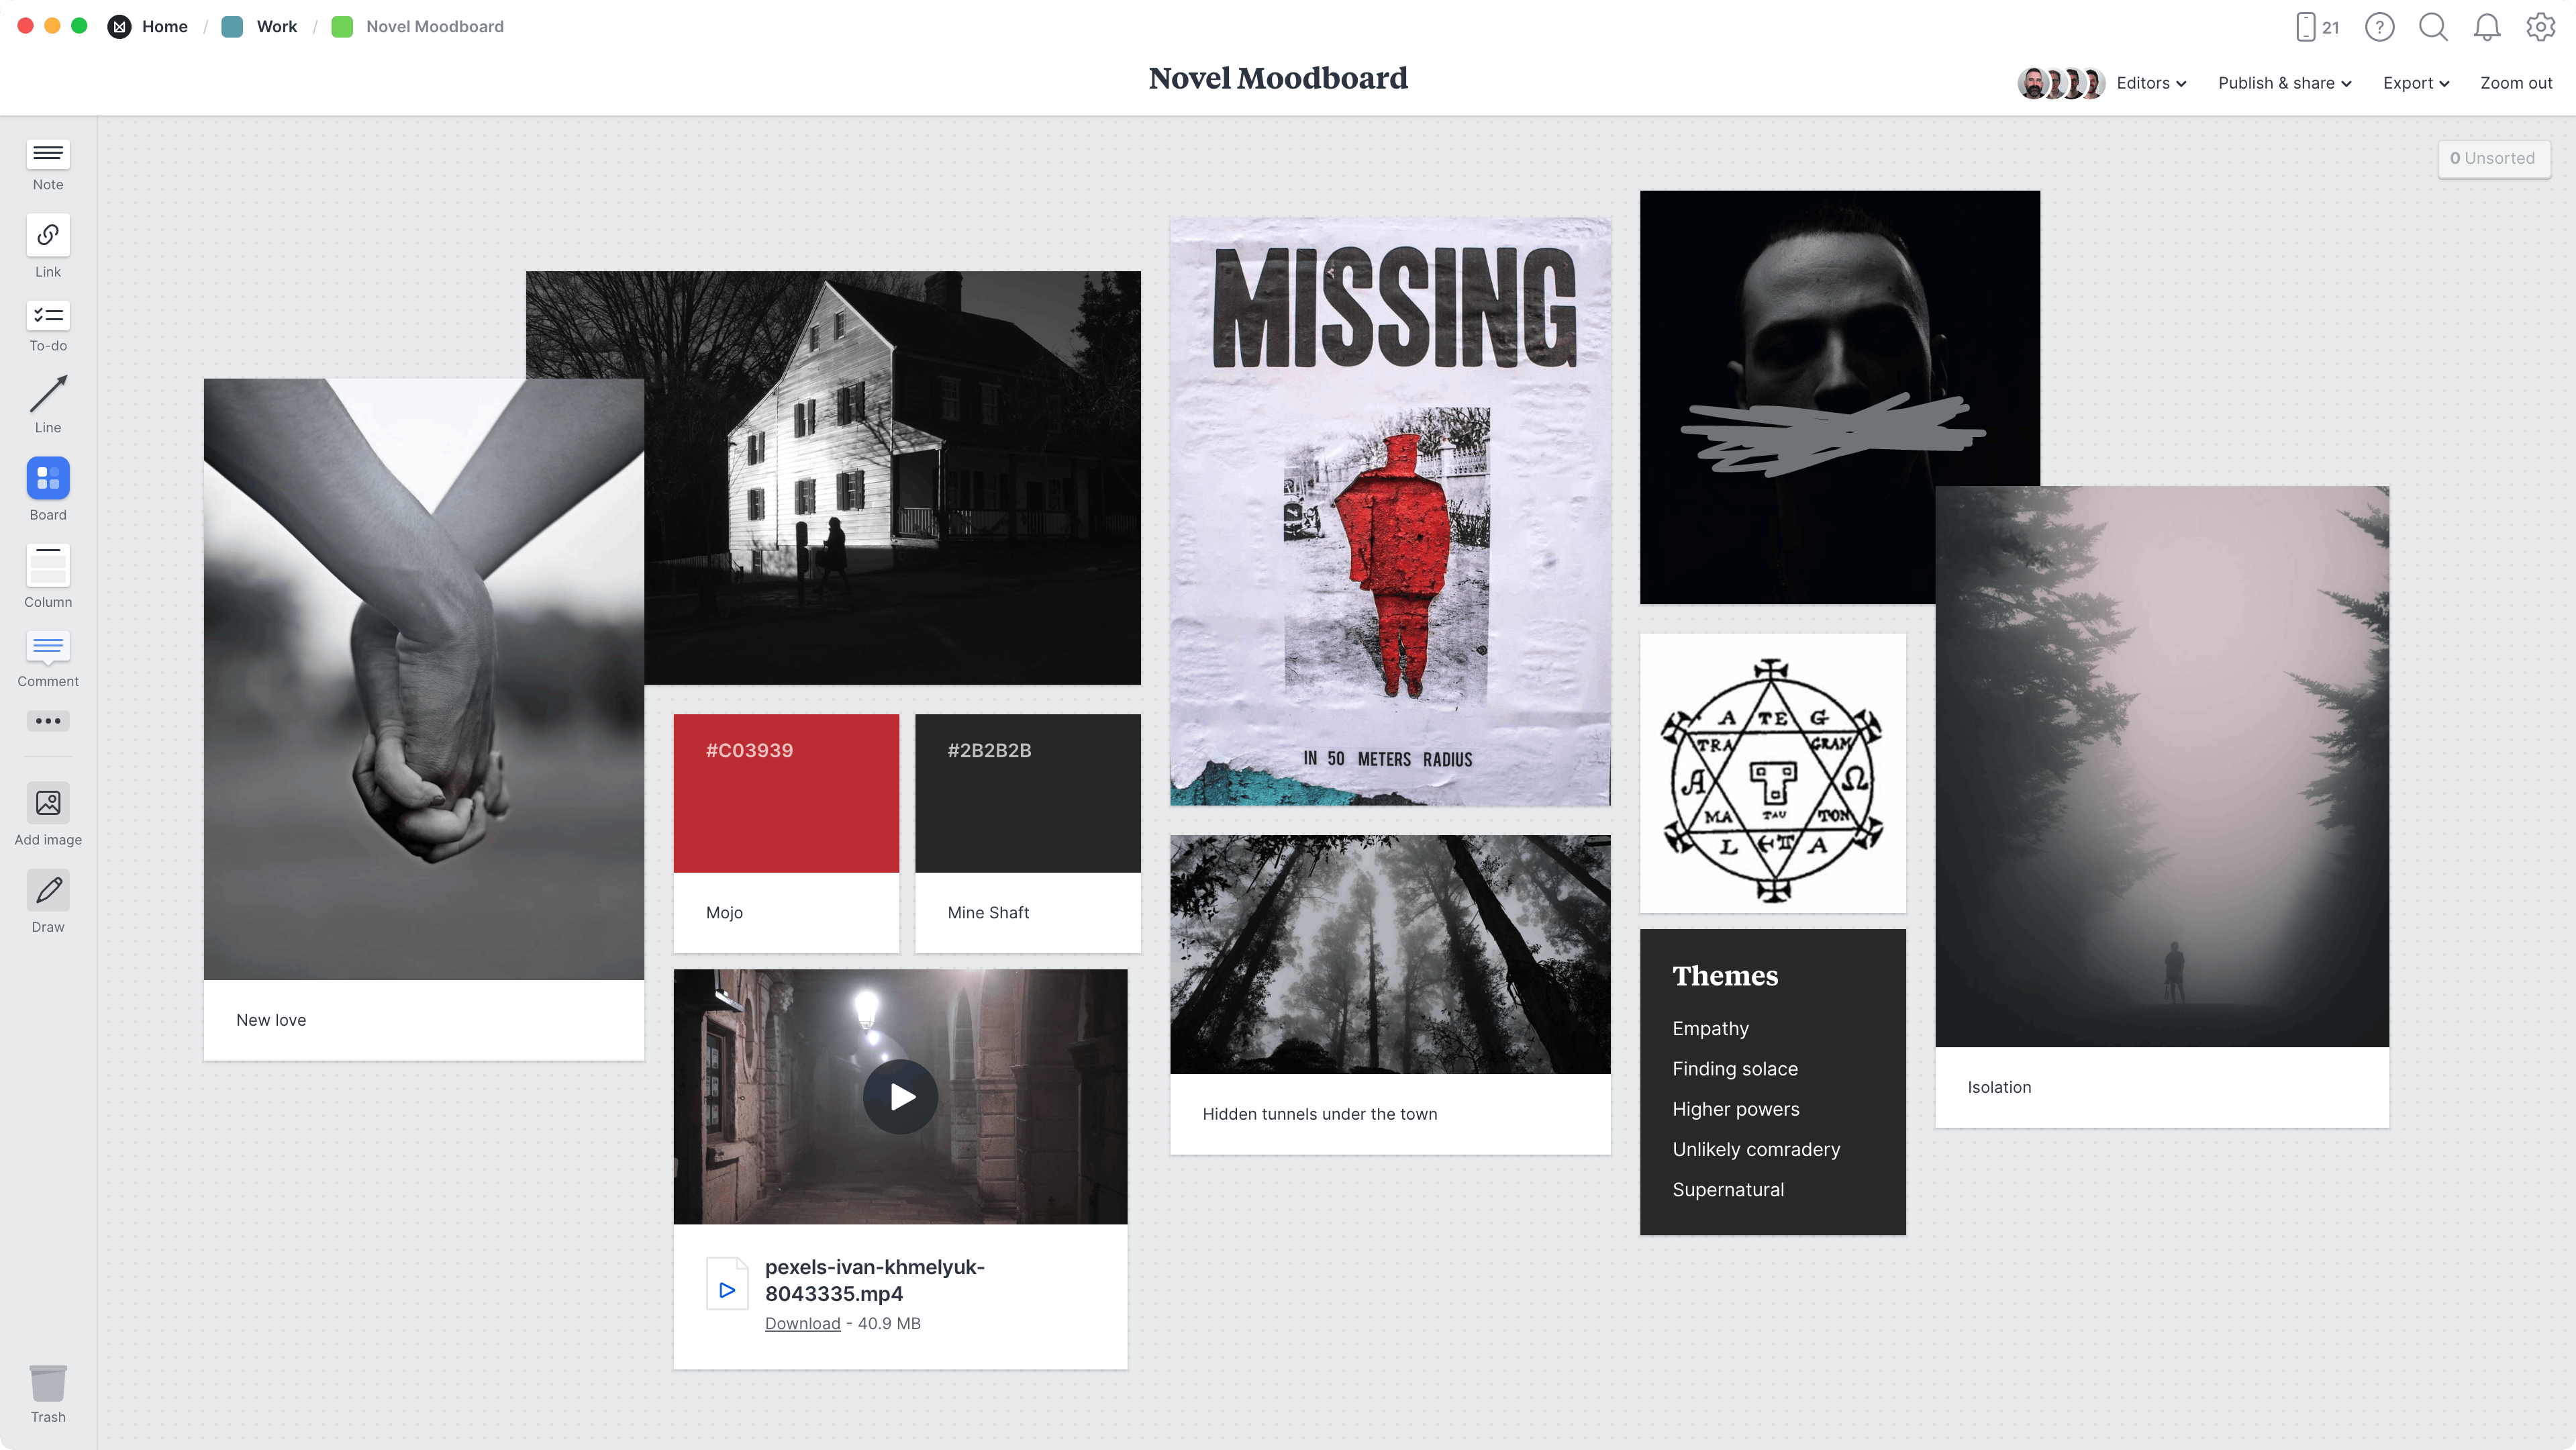 Novel Moodboard Template, within the Milanote app